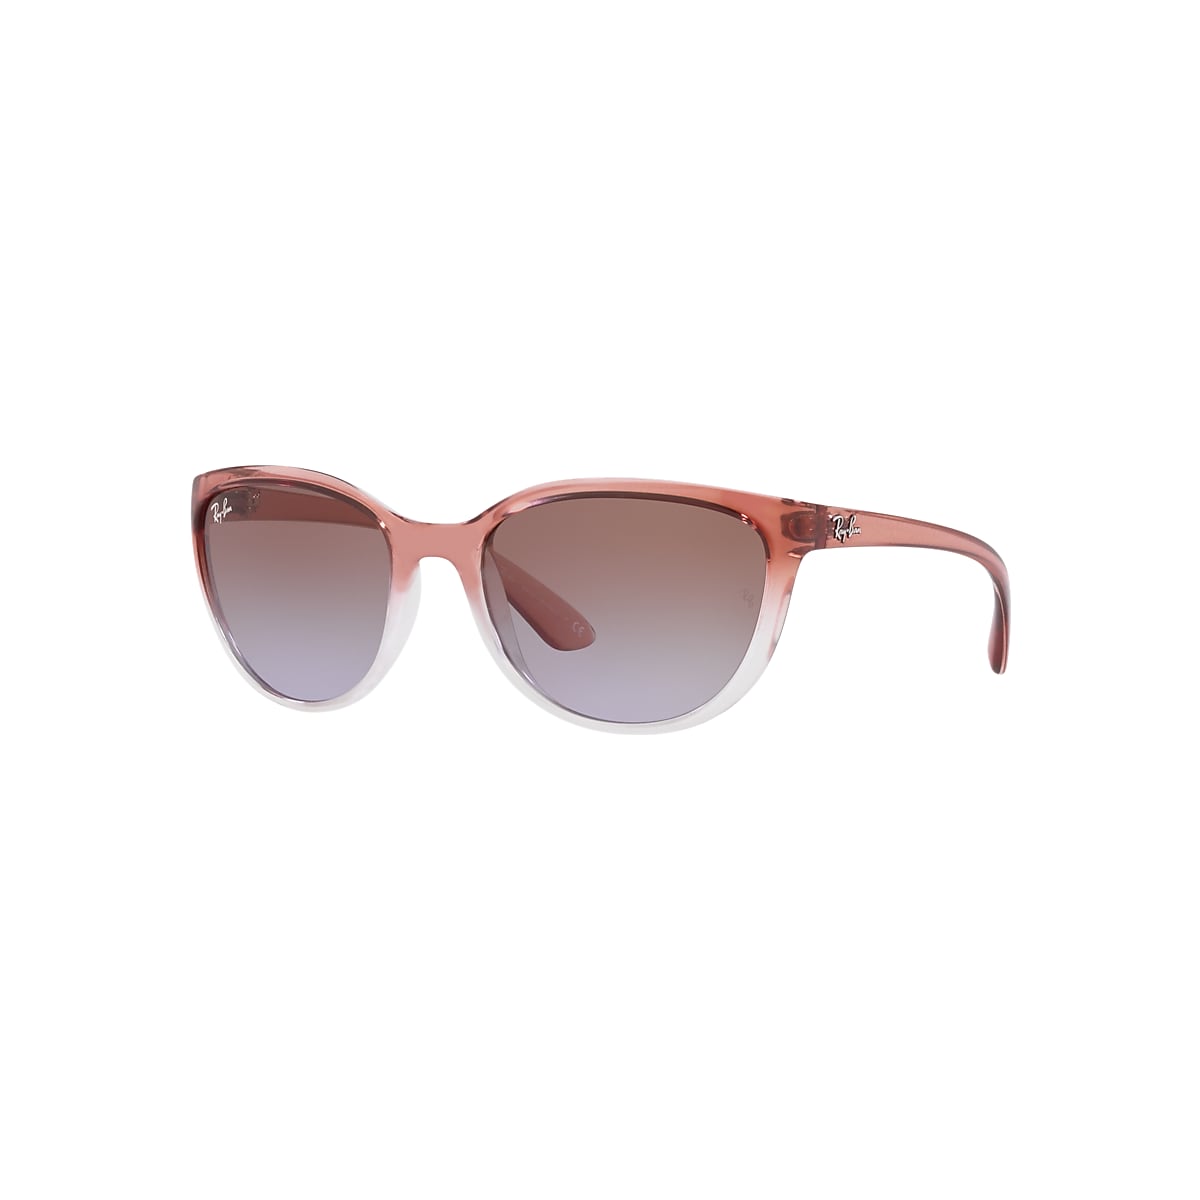 RB4167 Sunglasses in Light Brown and Brown - RB4167 | Ray-Ban 